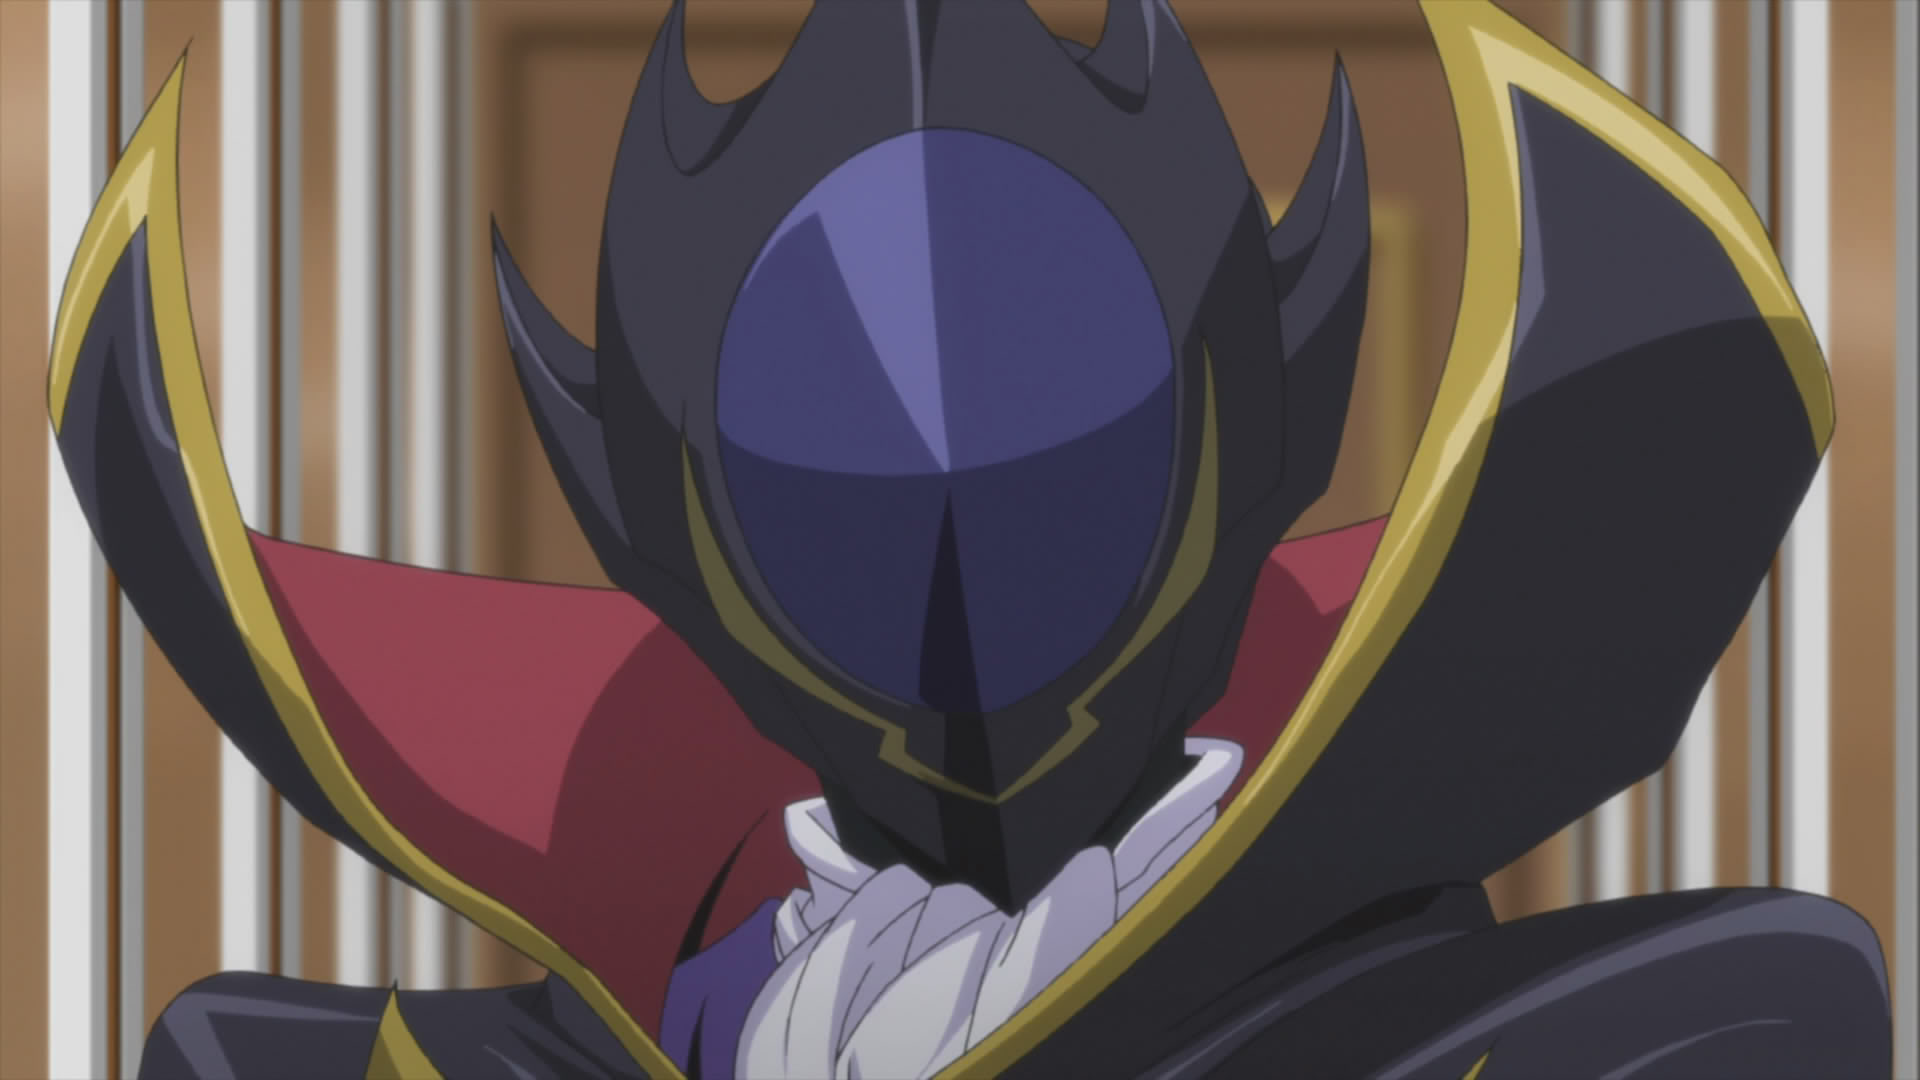 Anarchy In The Galaxy: Anime review: Code Geass: Lelouch of the Rebellion